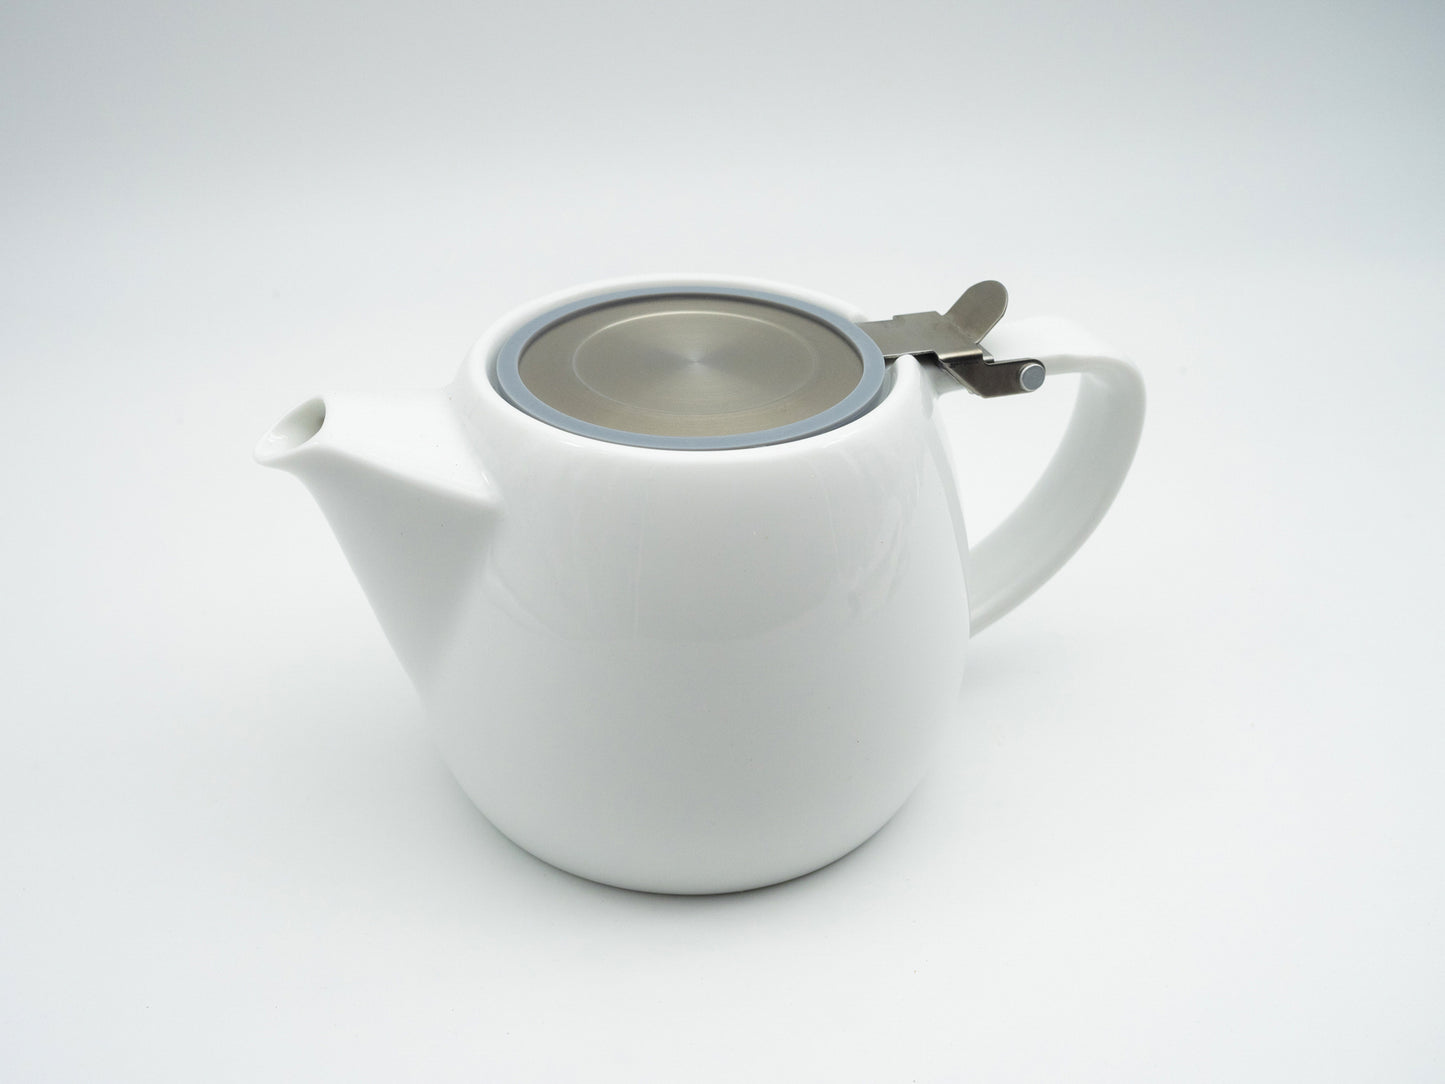 White porcelain stump tea pot with stainless steel lid and infuser basket